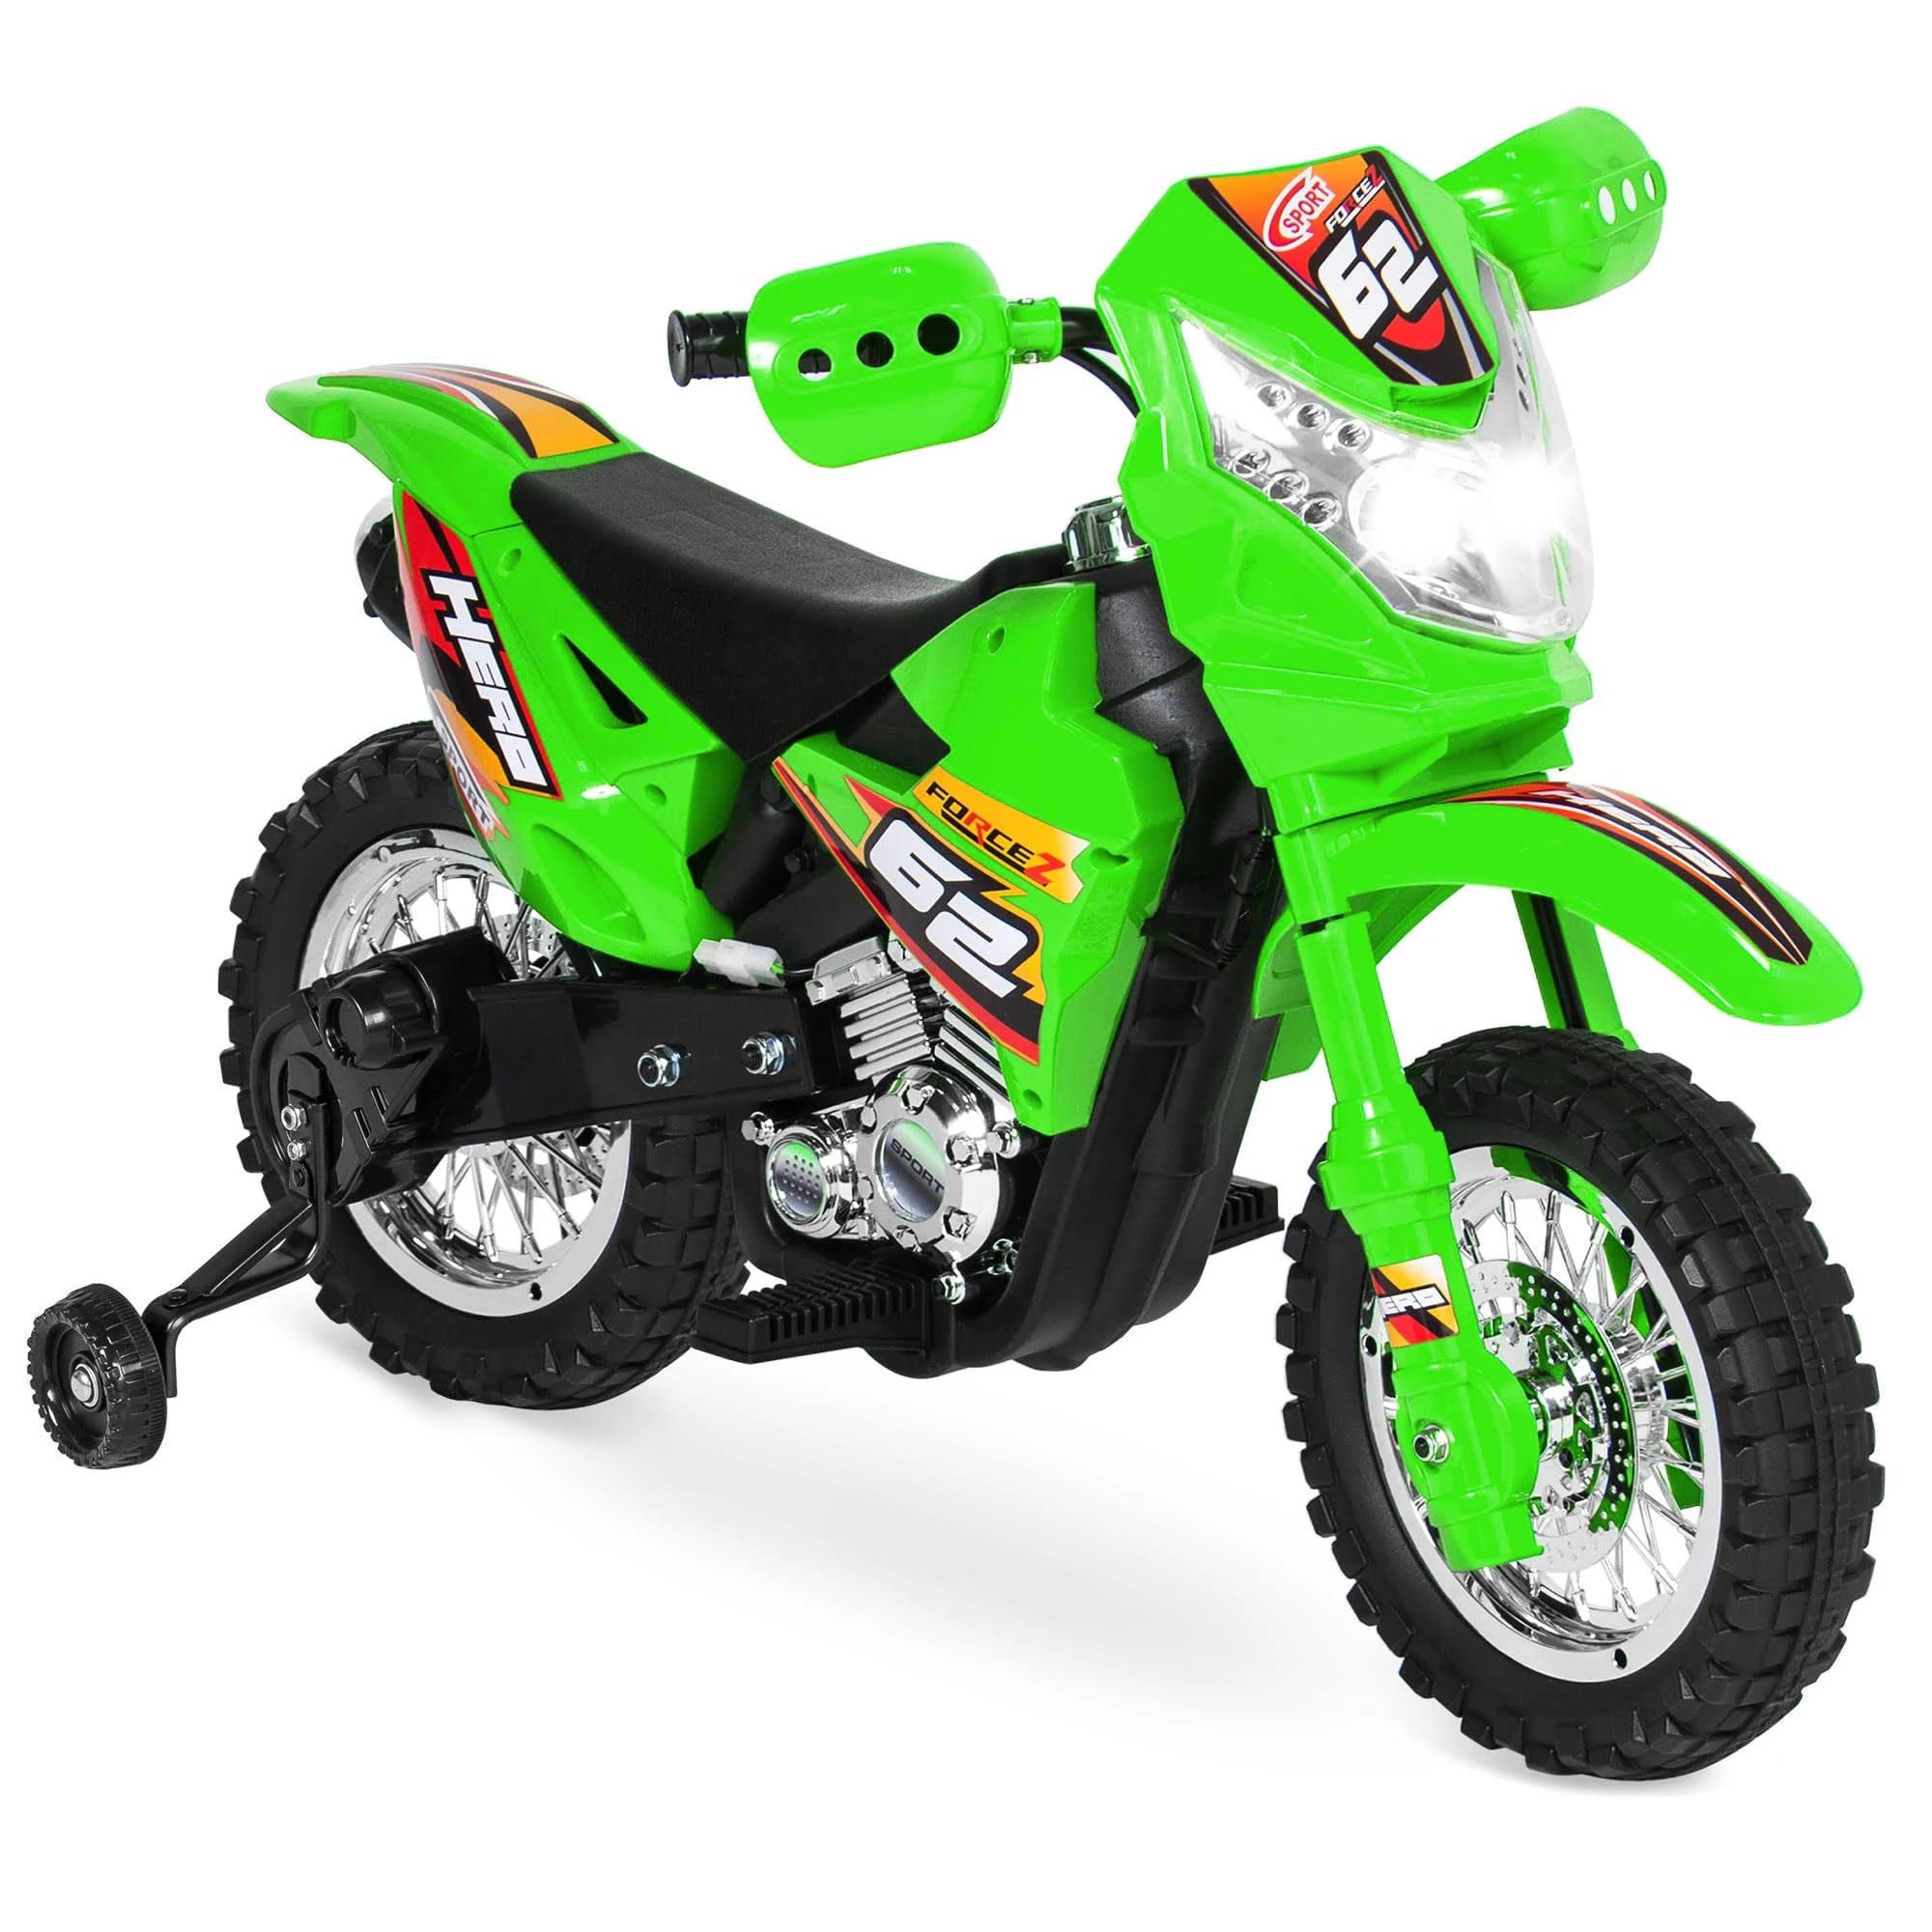 Children's 6V Electric Ride-on Motorcycle with Training Wheels | Image